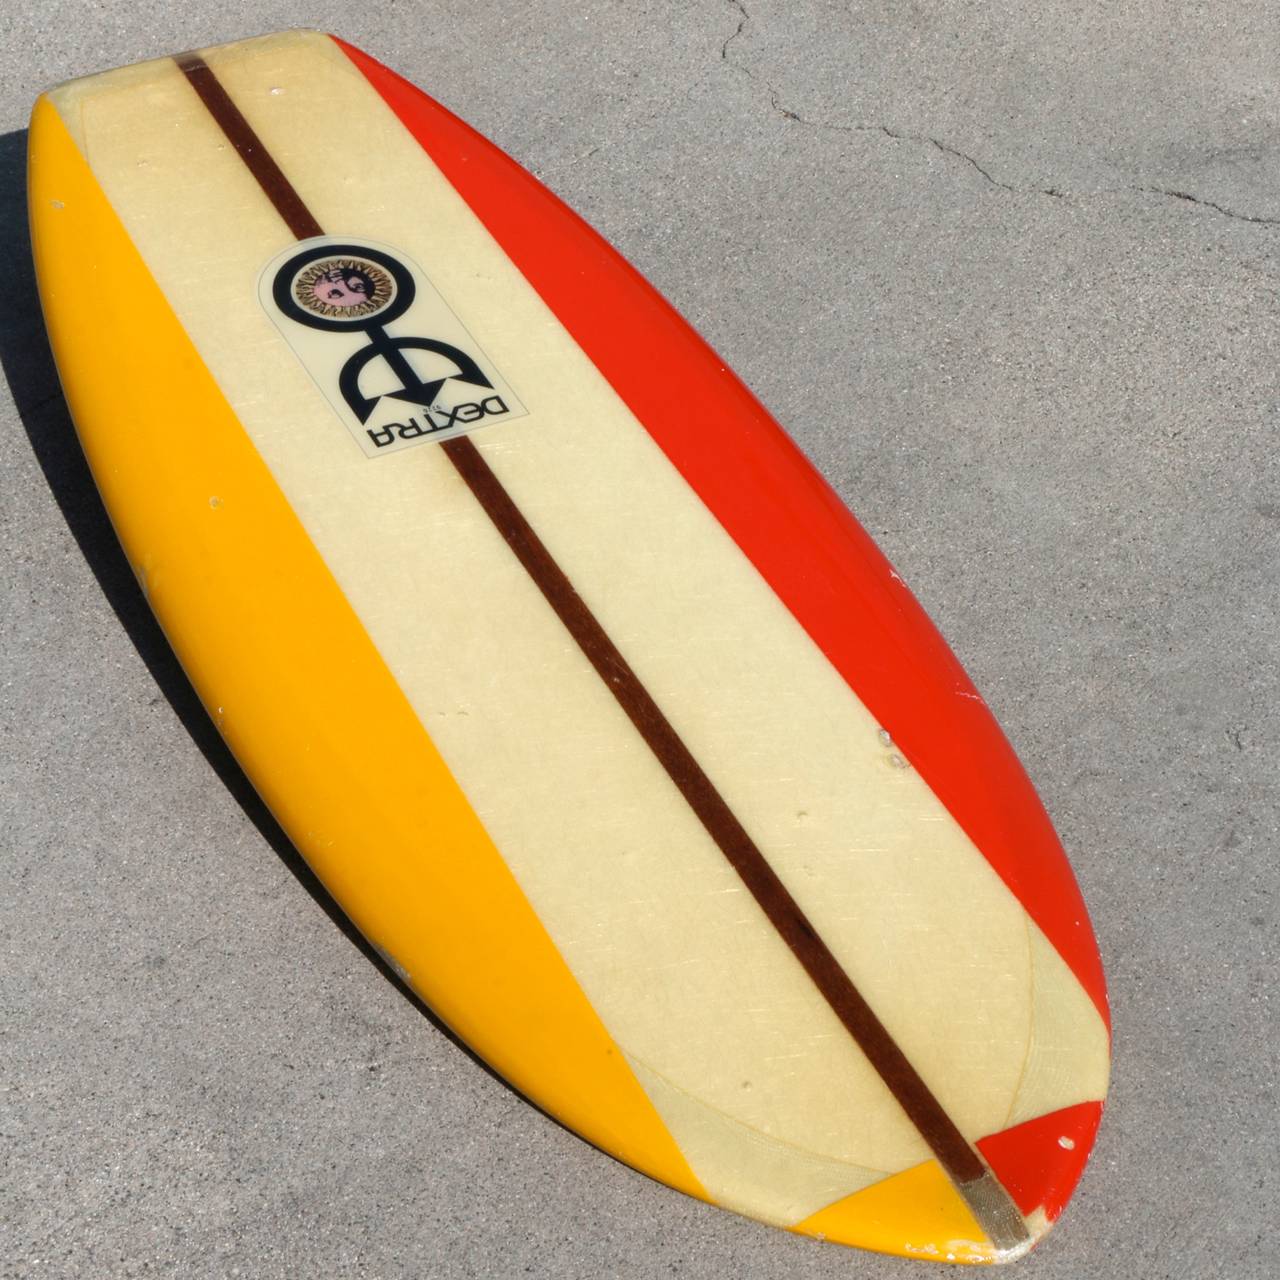 This 1960s Dextra Belly Board was made at the height of the longboard era to have the look of a traditional surfboard of the day at a quarter of the size. The perfect way to bring Classic authentic 1960s surf aesthetic into a home or office without